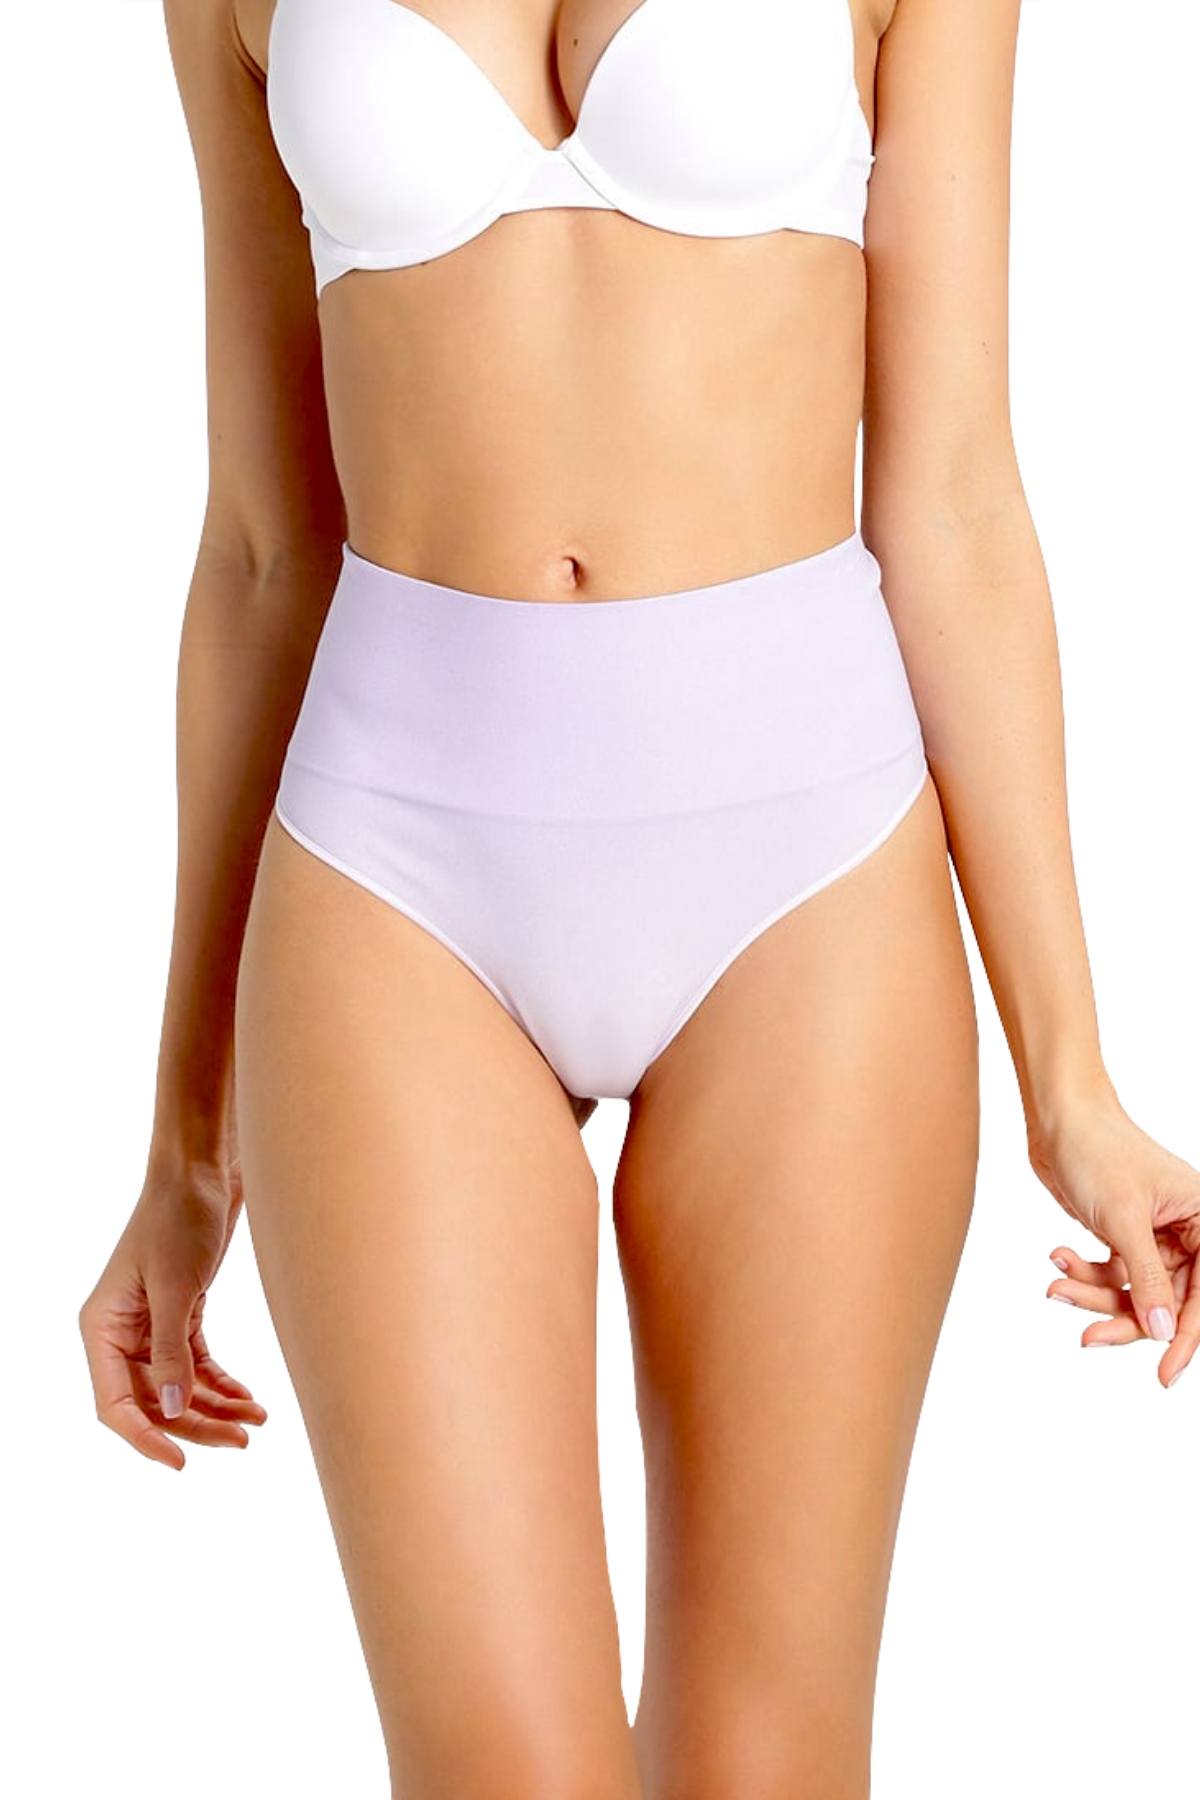 Spanx Everyday Shaping Thong –